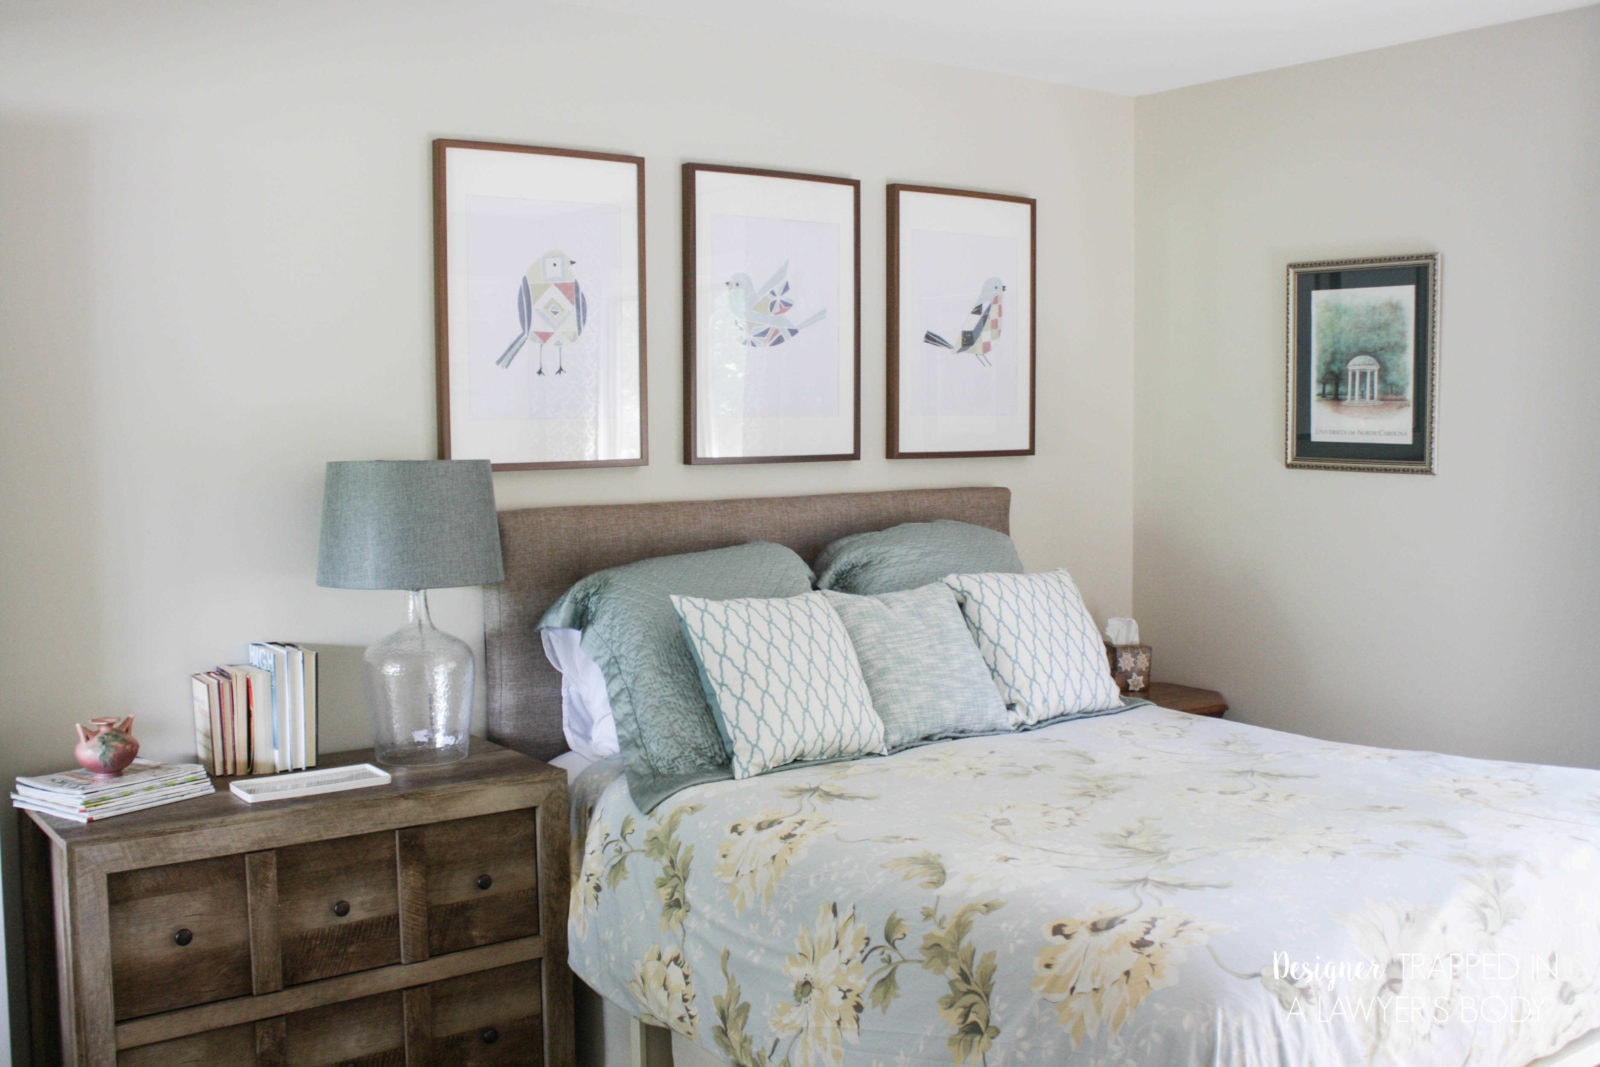 Wow! This blog is full of awesome DIY home decor ideas, like this quick and easy guest room makeover that was done in 1 day and on a budget! Full details at Designer Trapped in a Lawyer's Body.